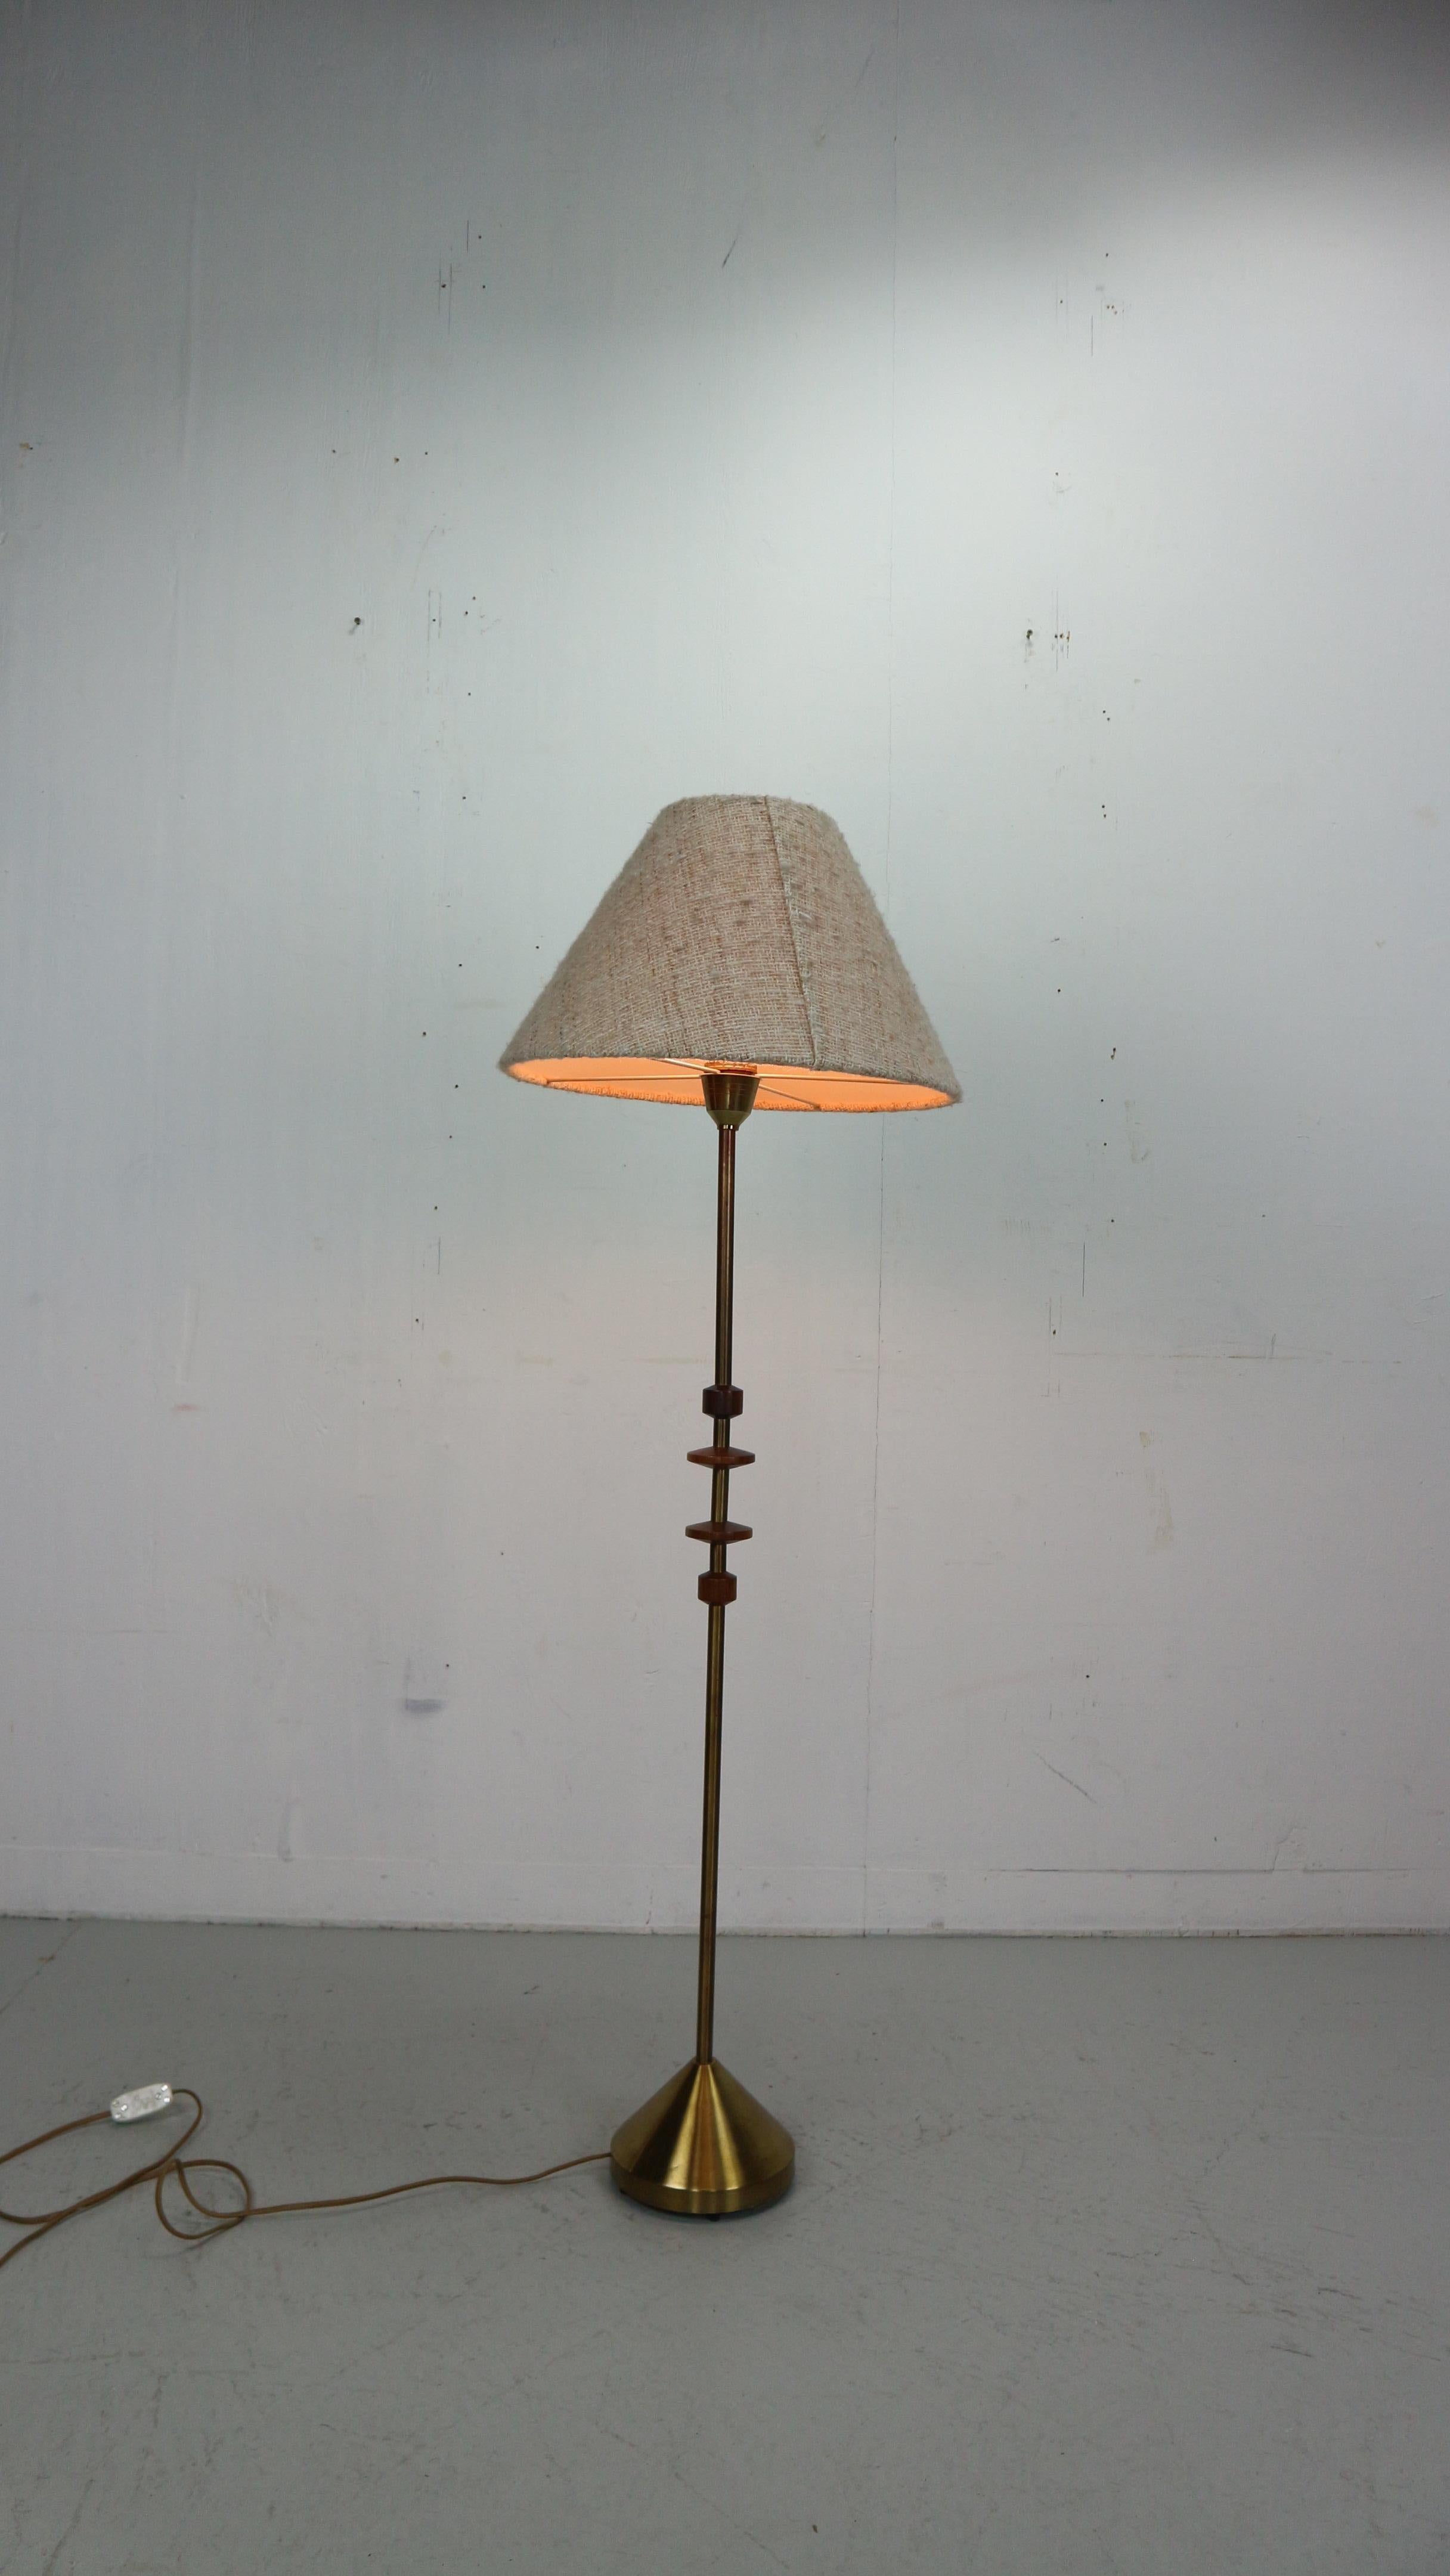 A beautifully designed vintage floor lamp in teak and brass, this dates from the 1960’s. It was made in Denmark, and it is of superb quality. It has an interesting shape with beautifully shaped wood sections. The wool lampshade matches the lamp very